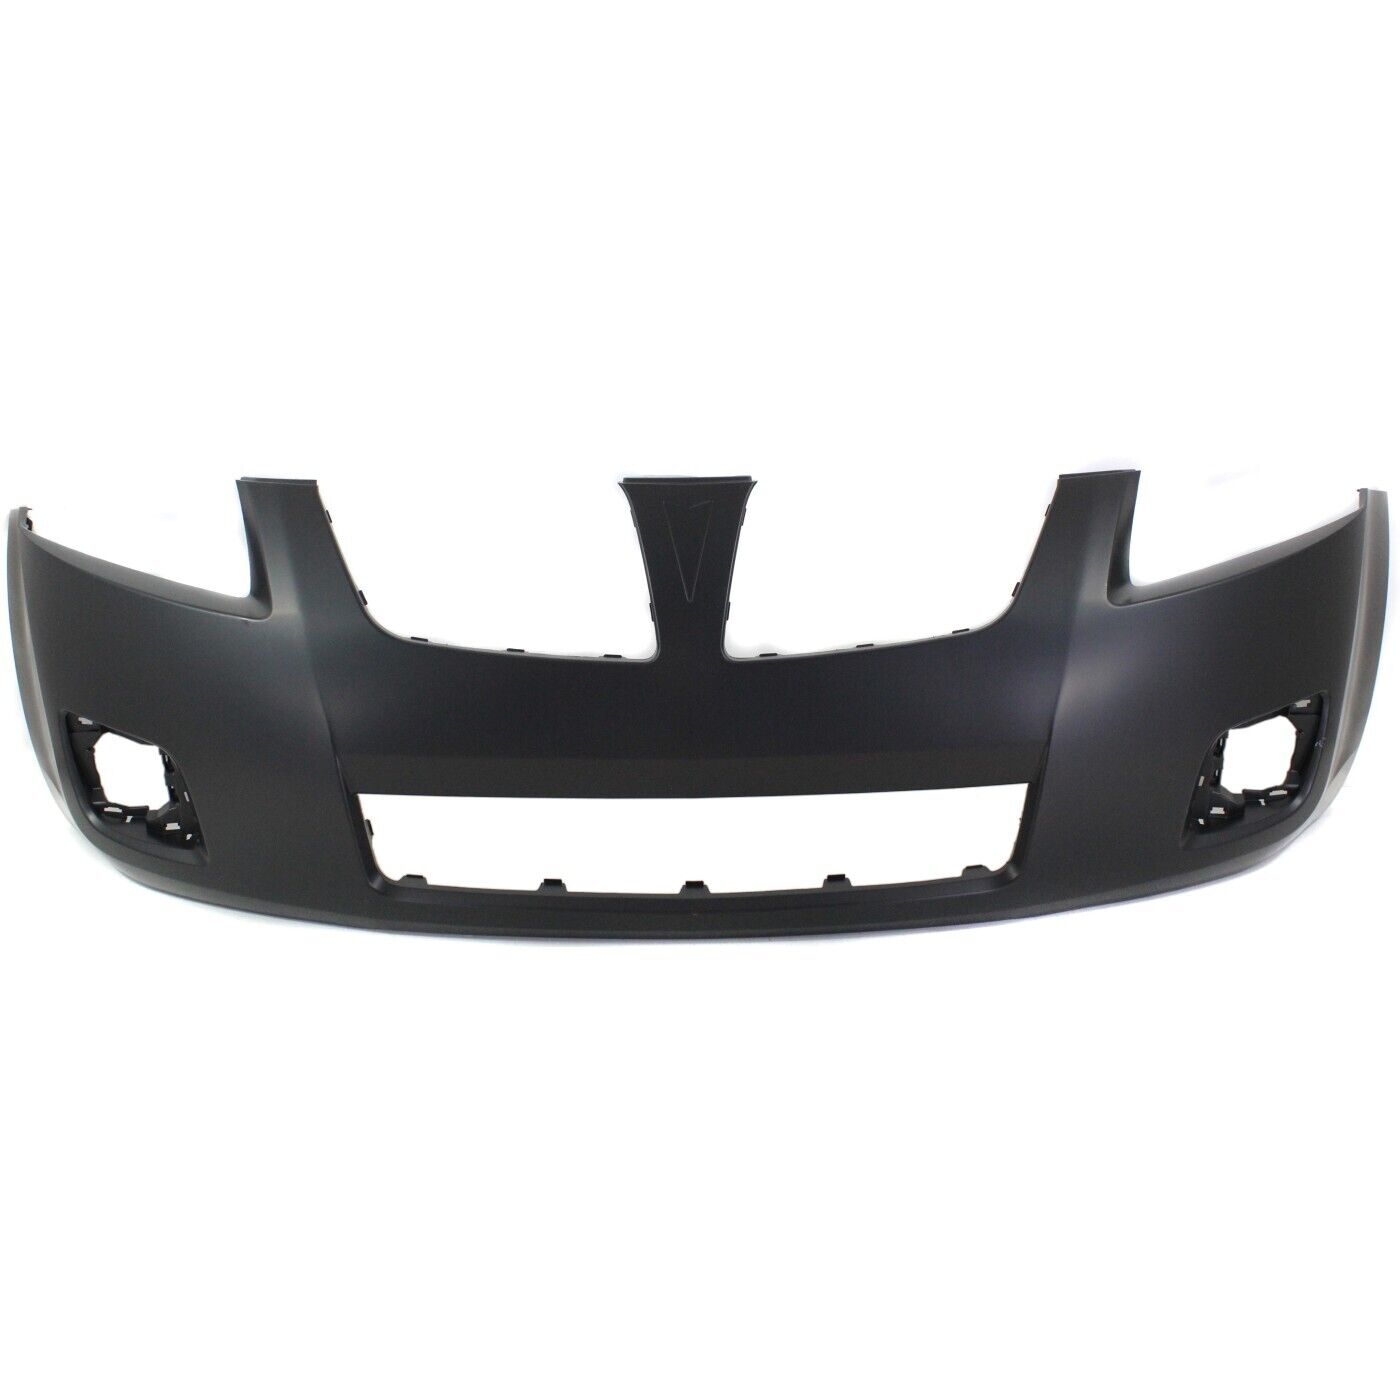 Front Bumper Cover For 2009-2010 Pontiac Vibe w/ fog lamp holes Primed